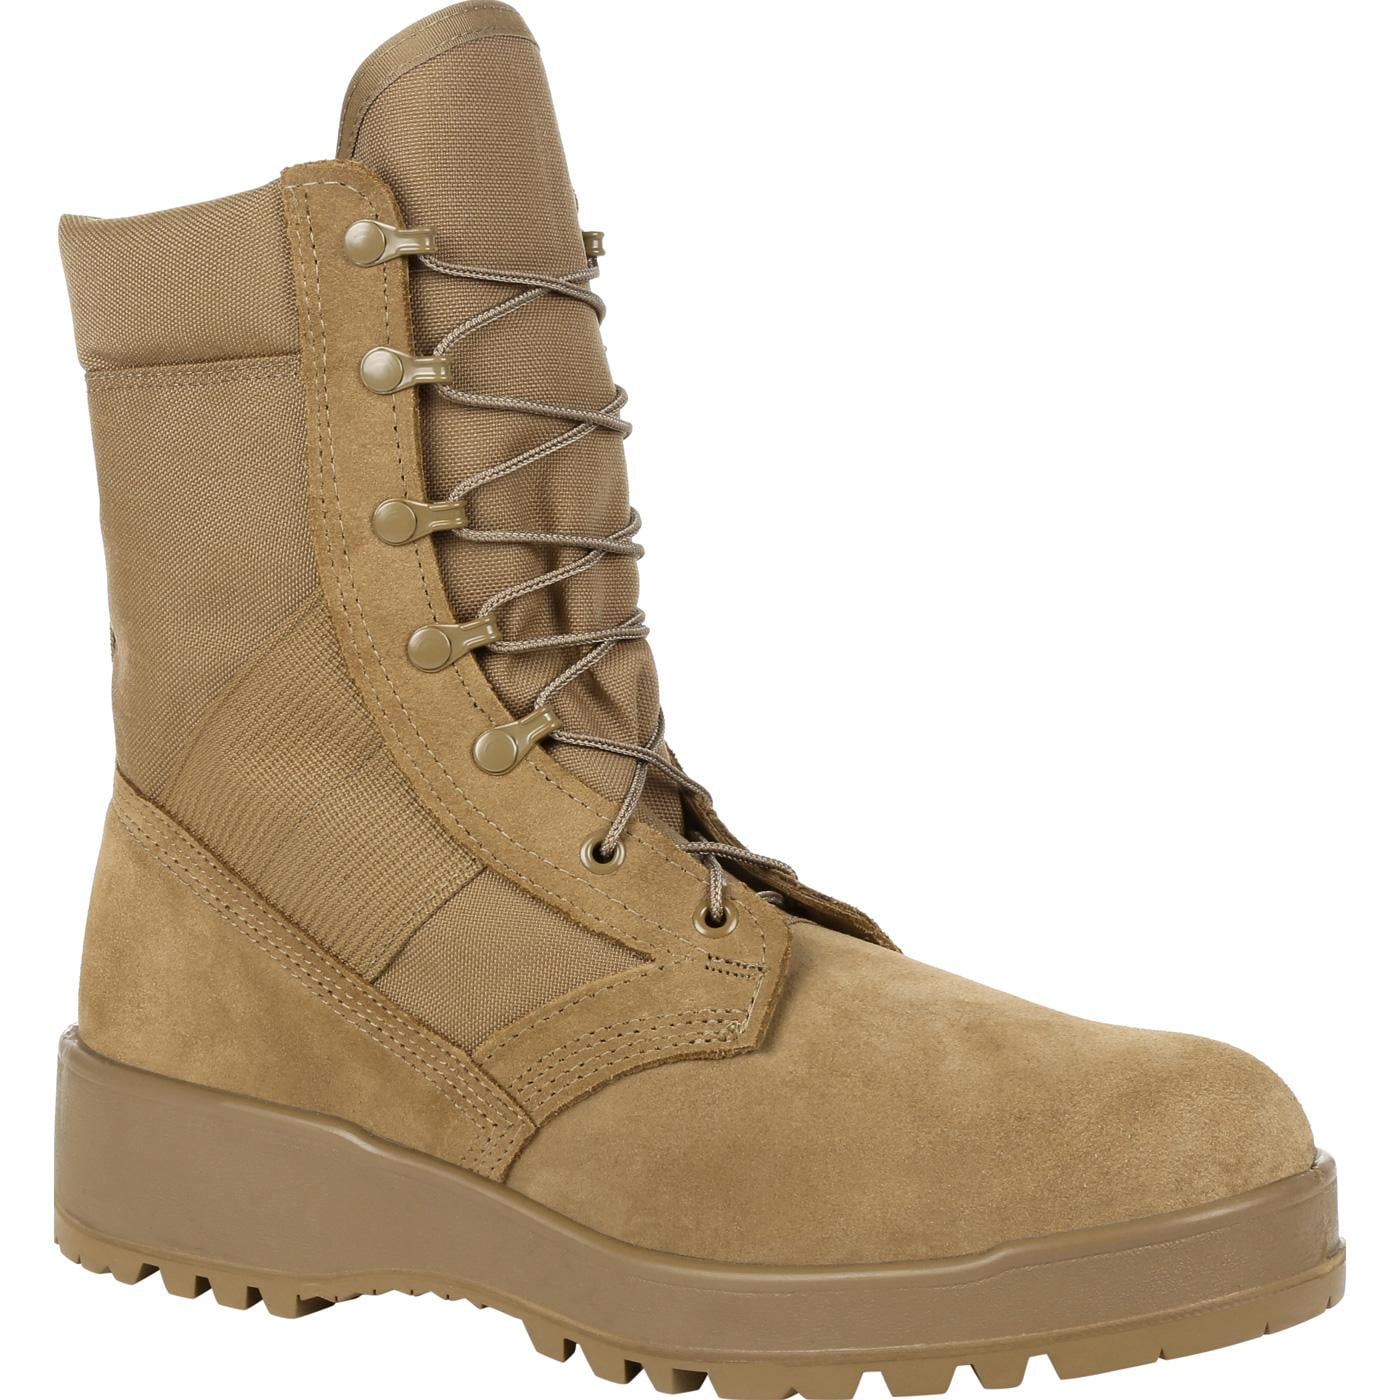 Rocky C7 Cxt Lightweight Commercial Military Boot 